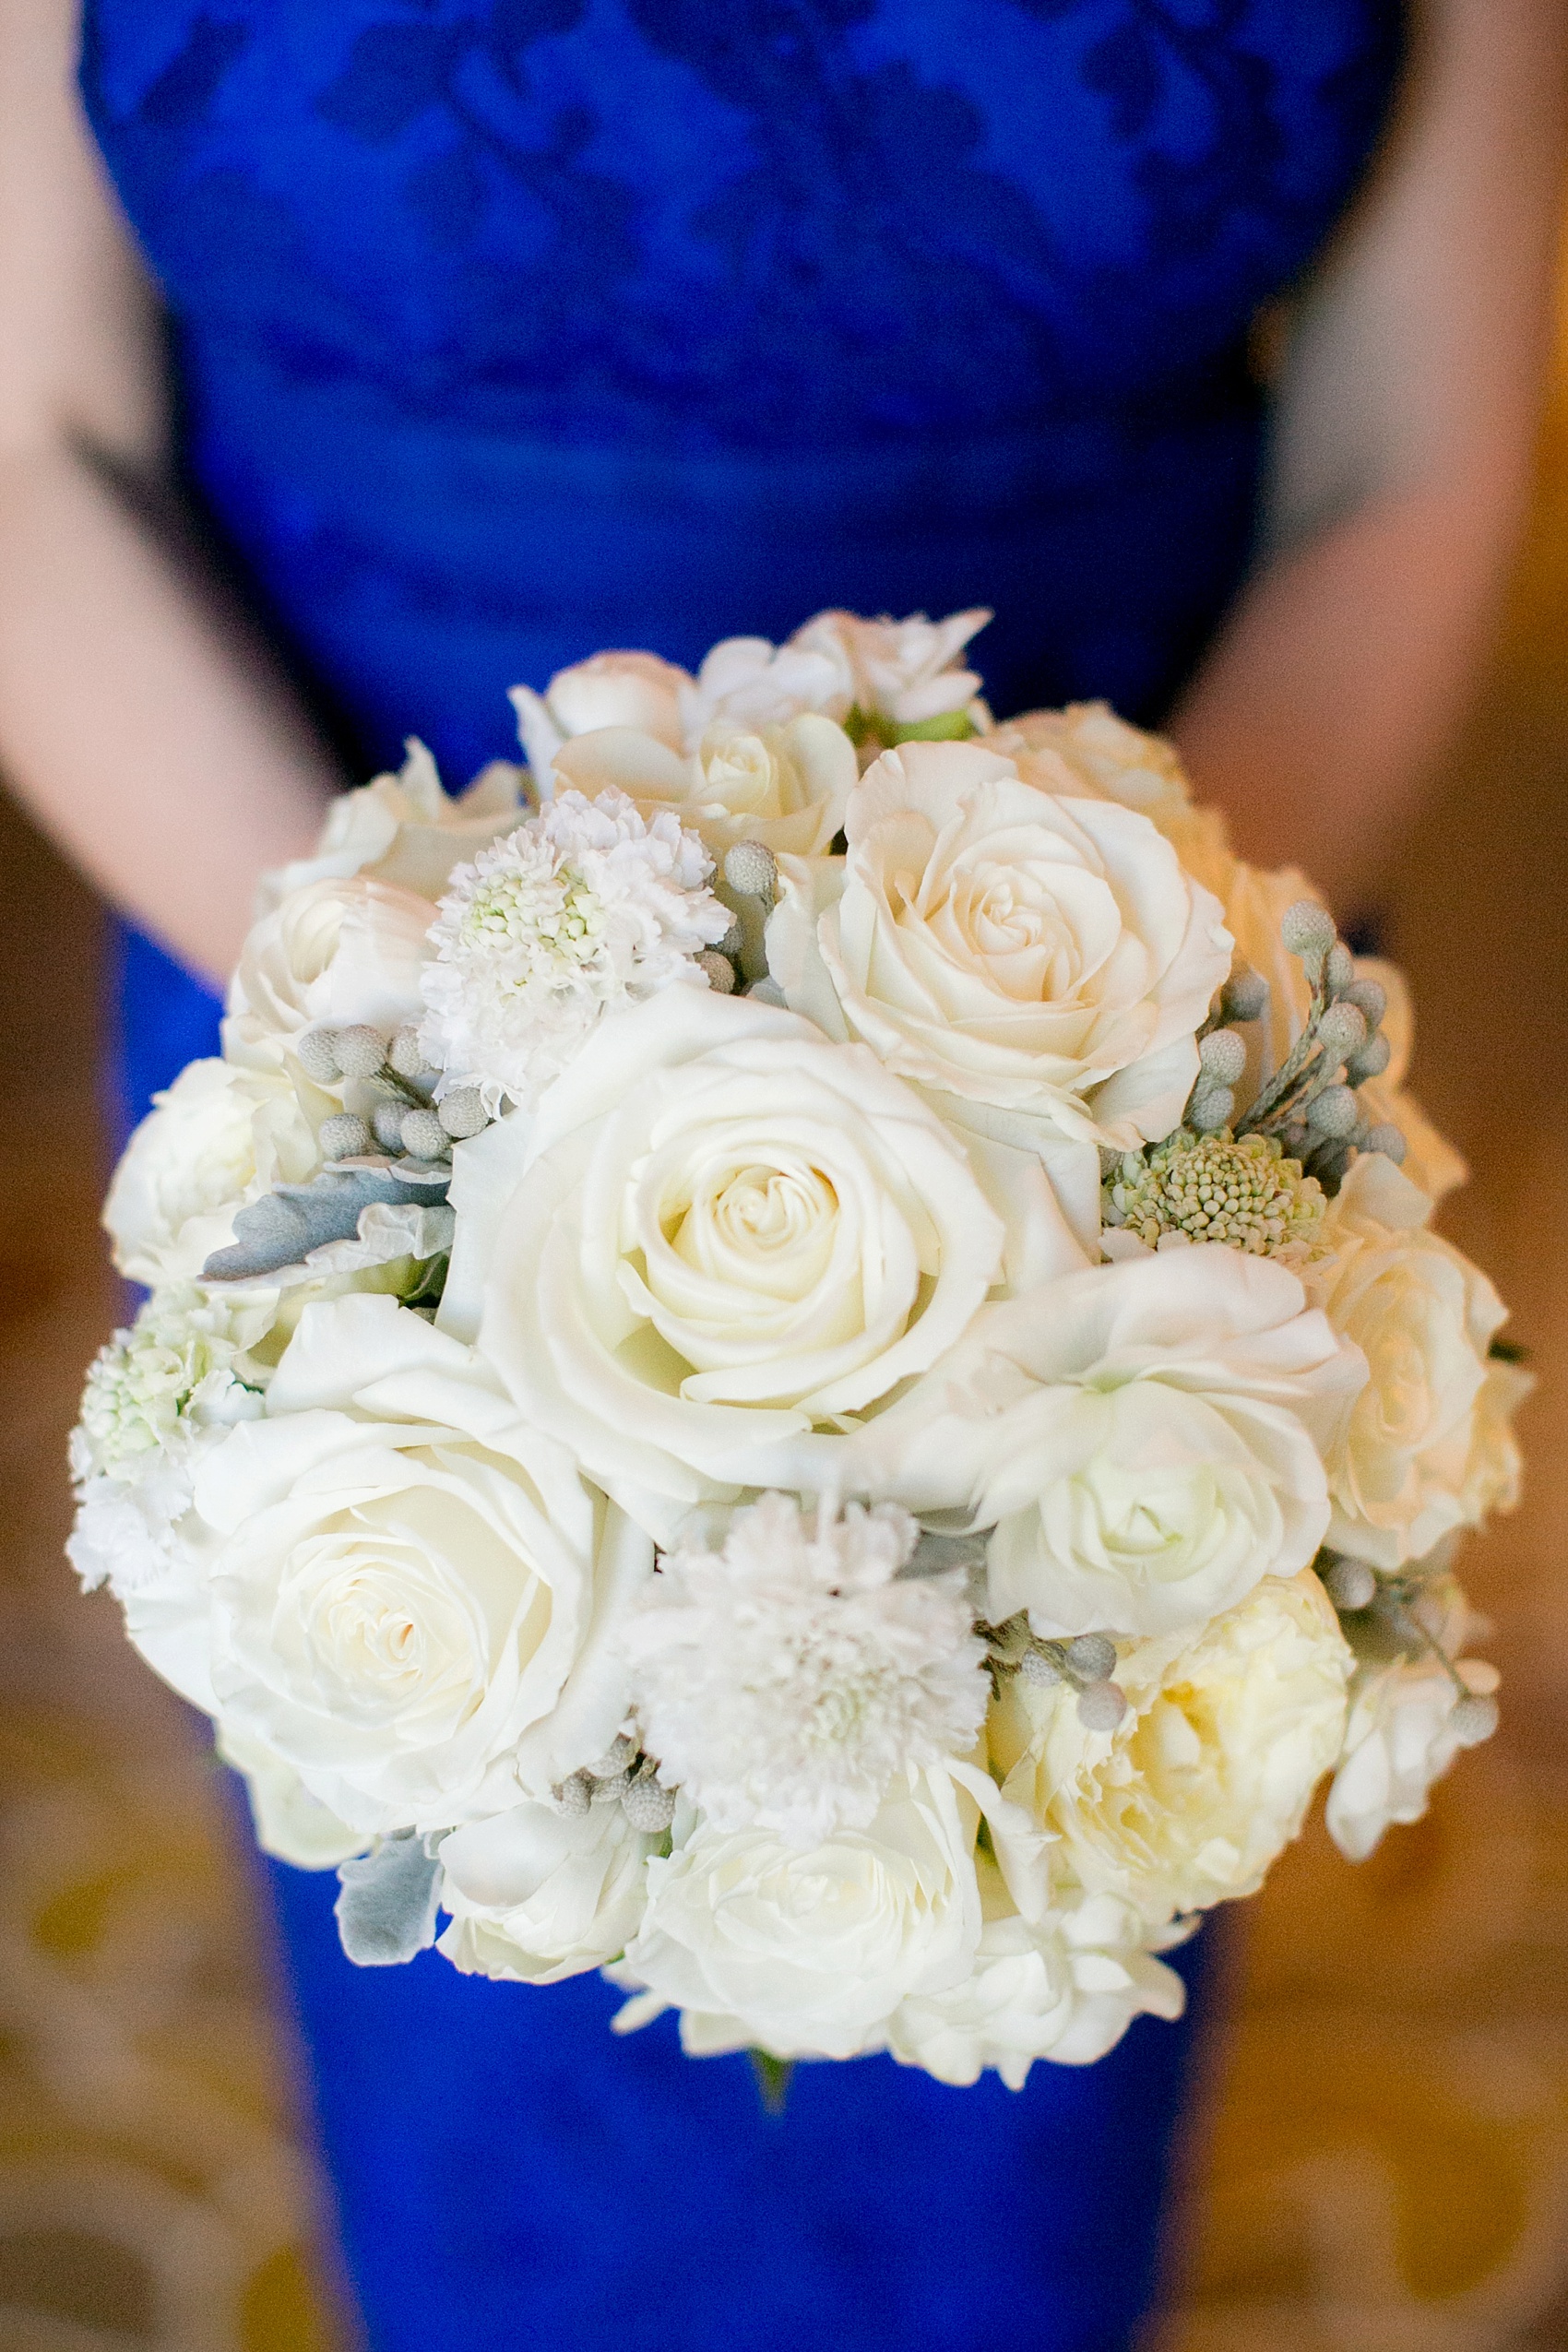 Washington, DC wedding photos by Mikkel Paige. The maid of honor in cobalt blue carried an all winter white bouquet at The Ritz Carlton, Pentagon City.